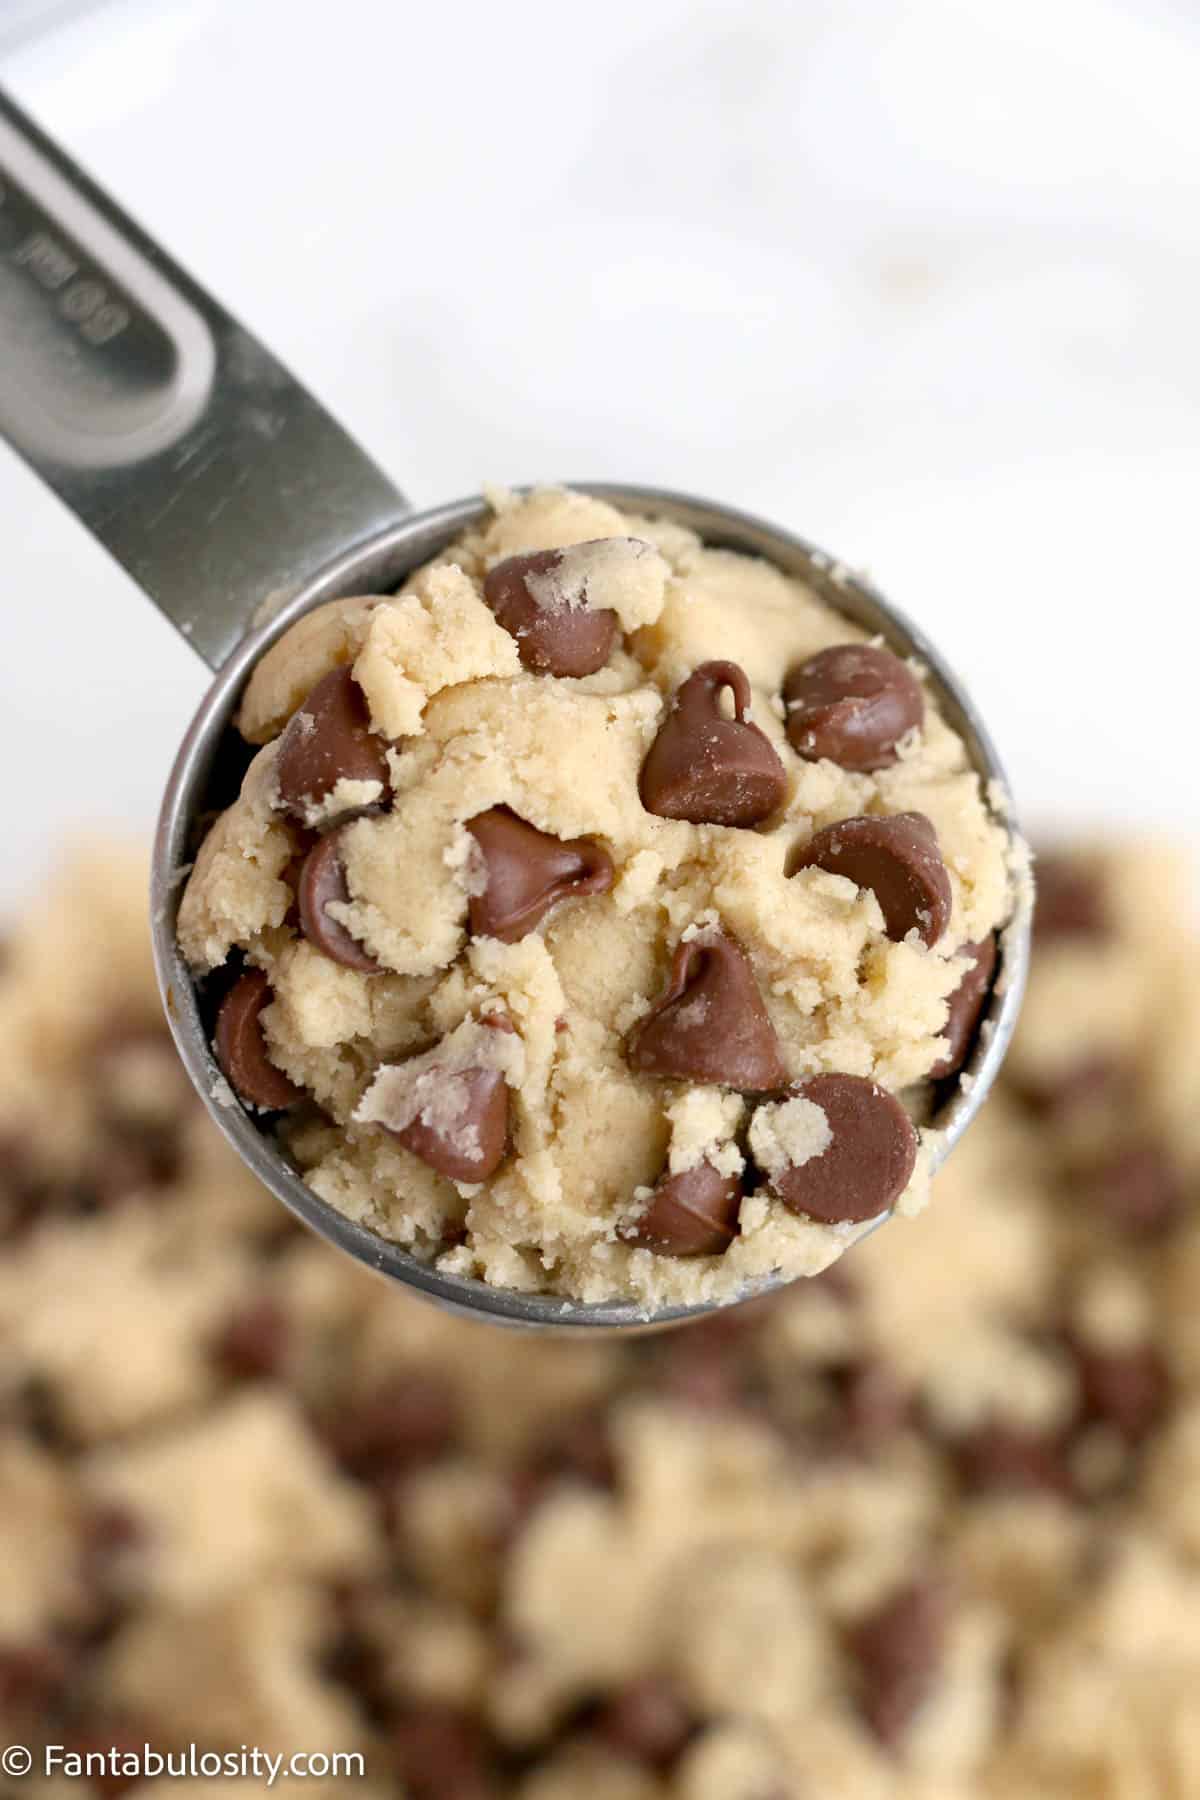 1/4 cup scoop of chocolate chip cookie dough.